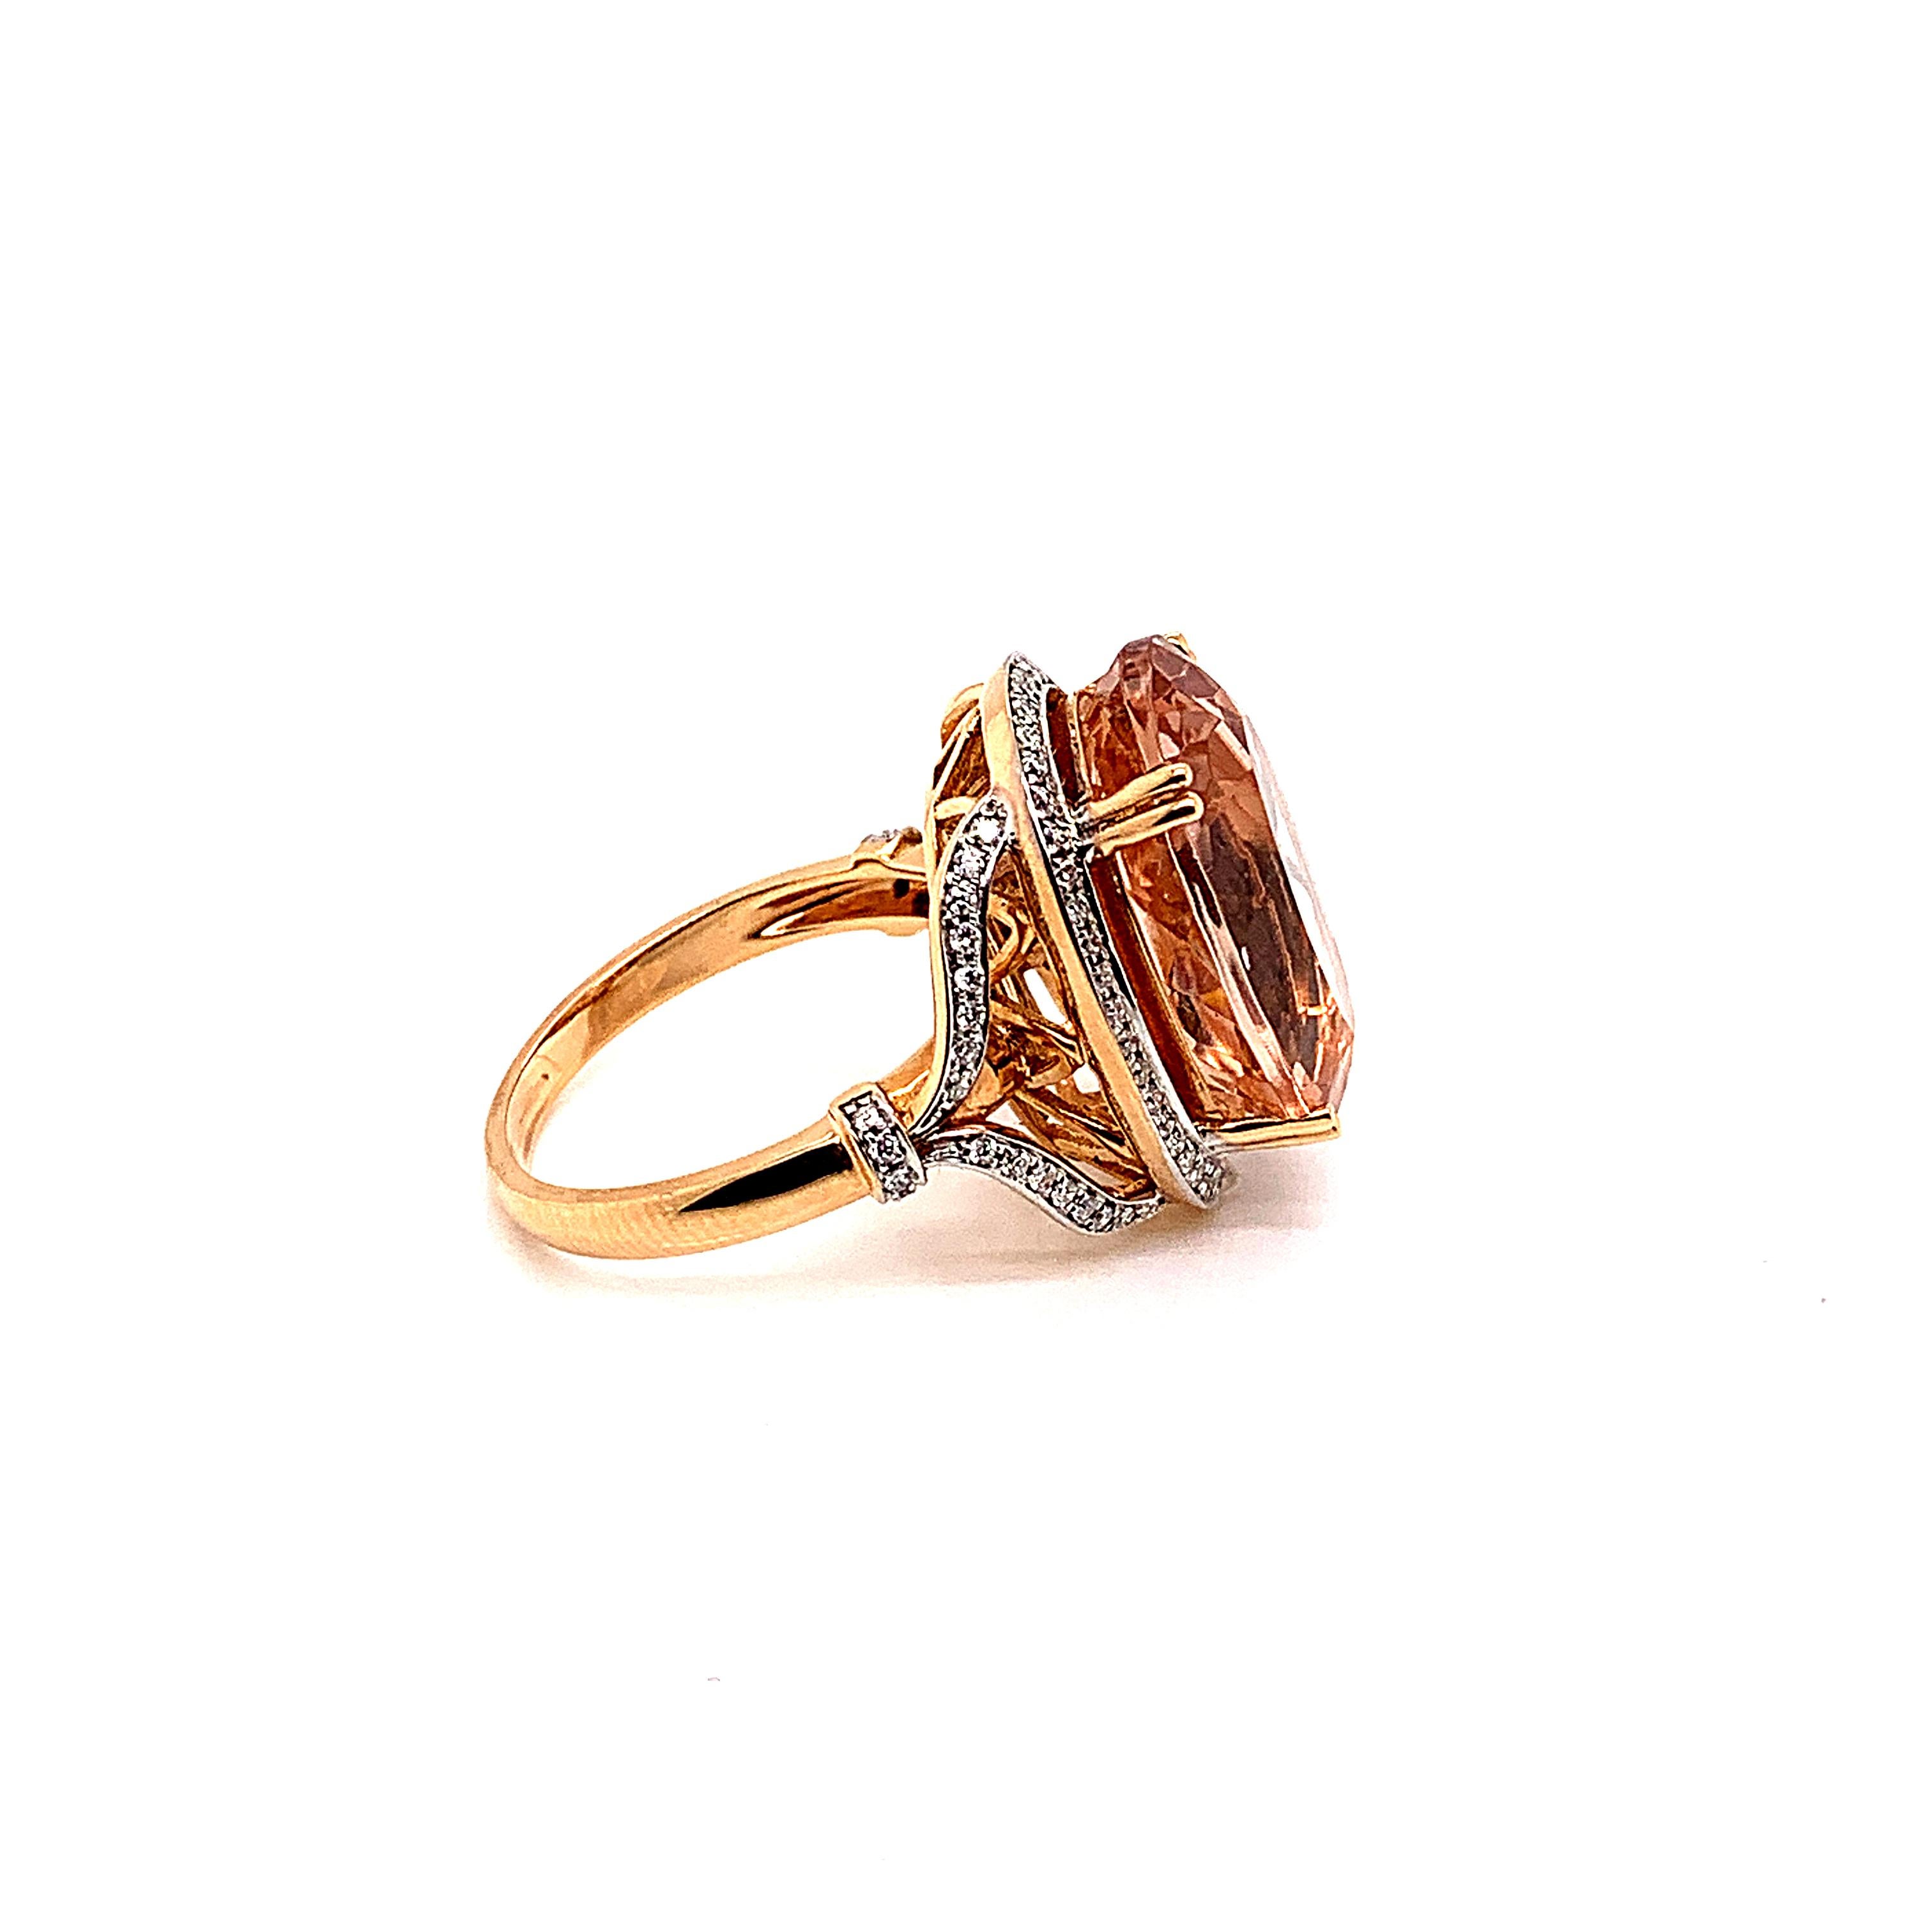 Contemporary 11.84 Carat Oval Shaped Morganite Ring in 18 Karat Rose Gold with Diamonds For Sale